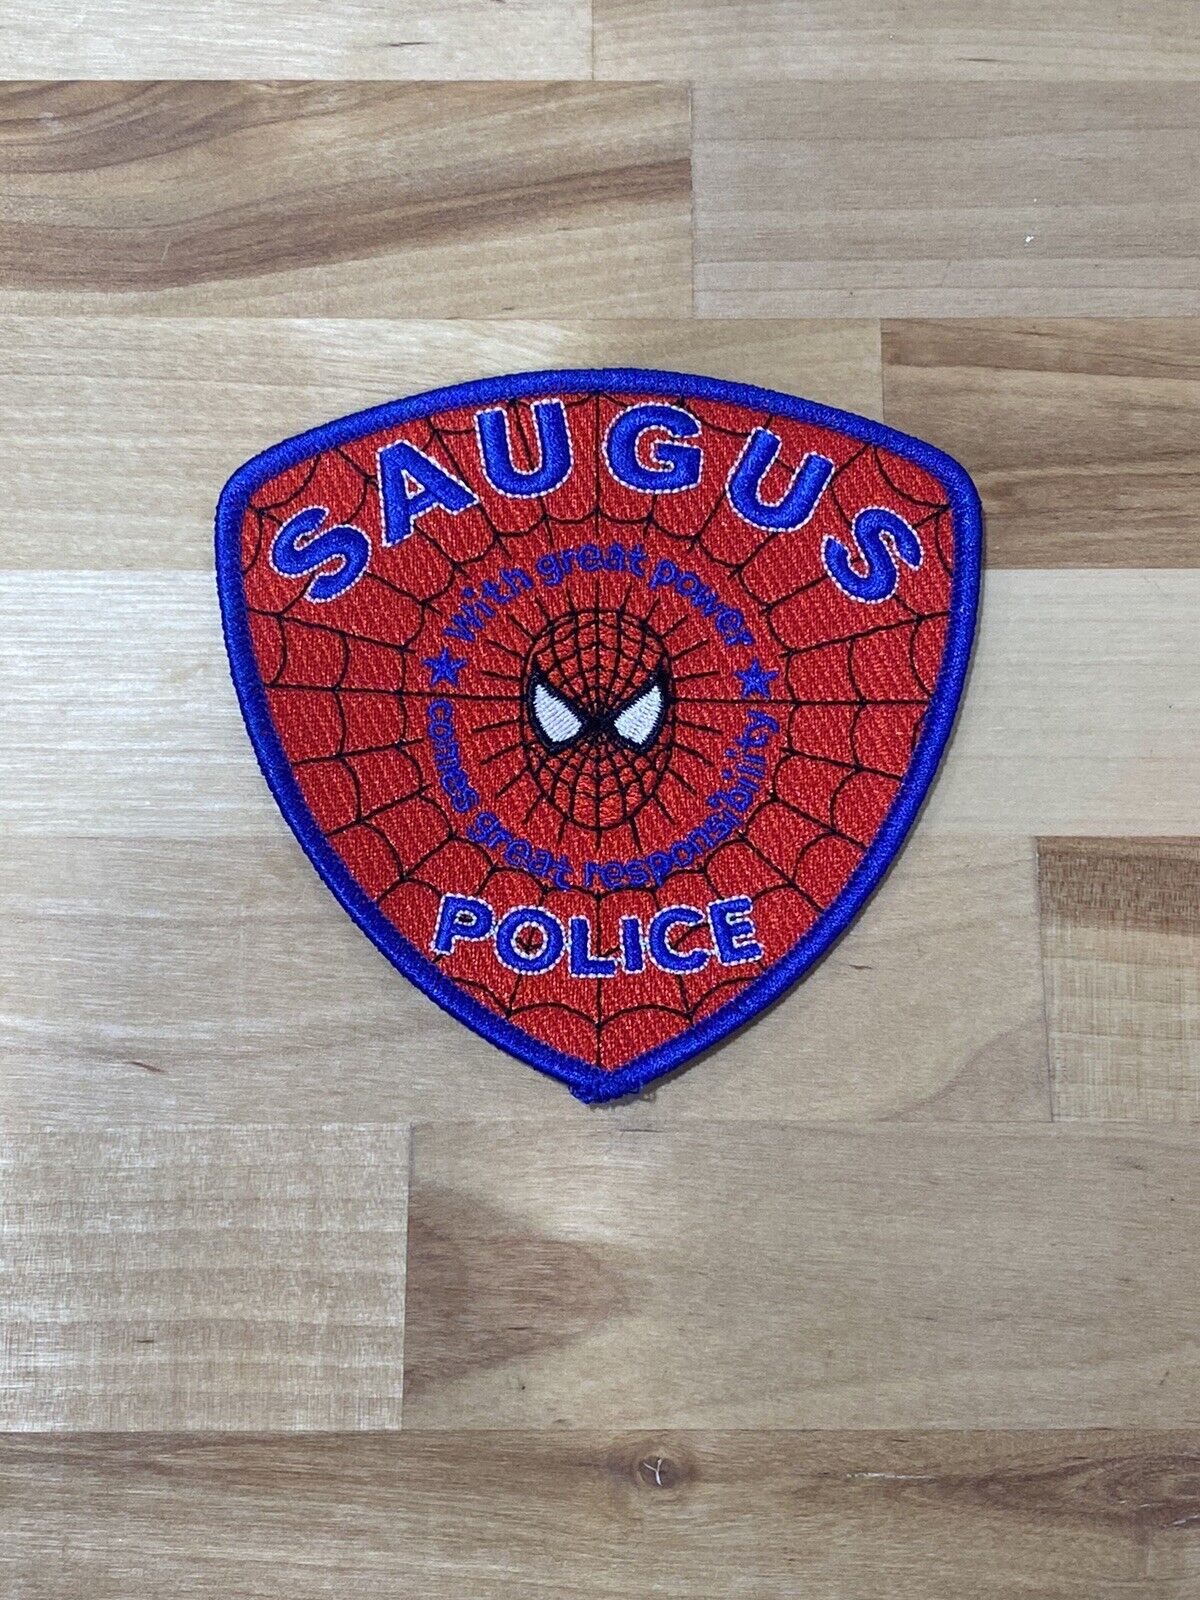 Saugus MA Police Department Spider-man Patch - New